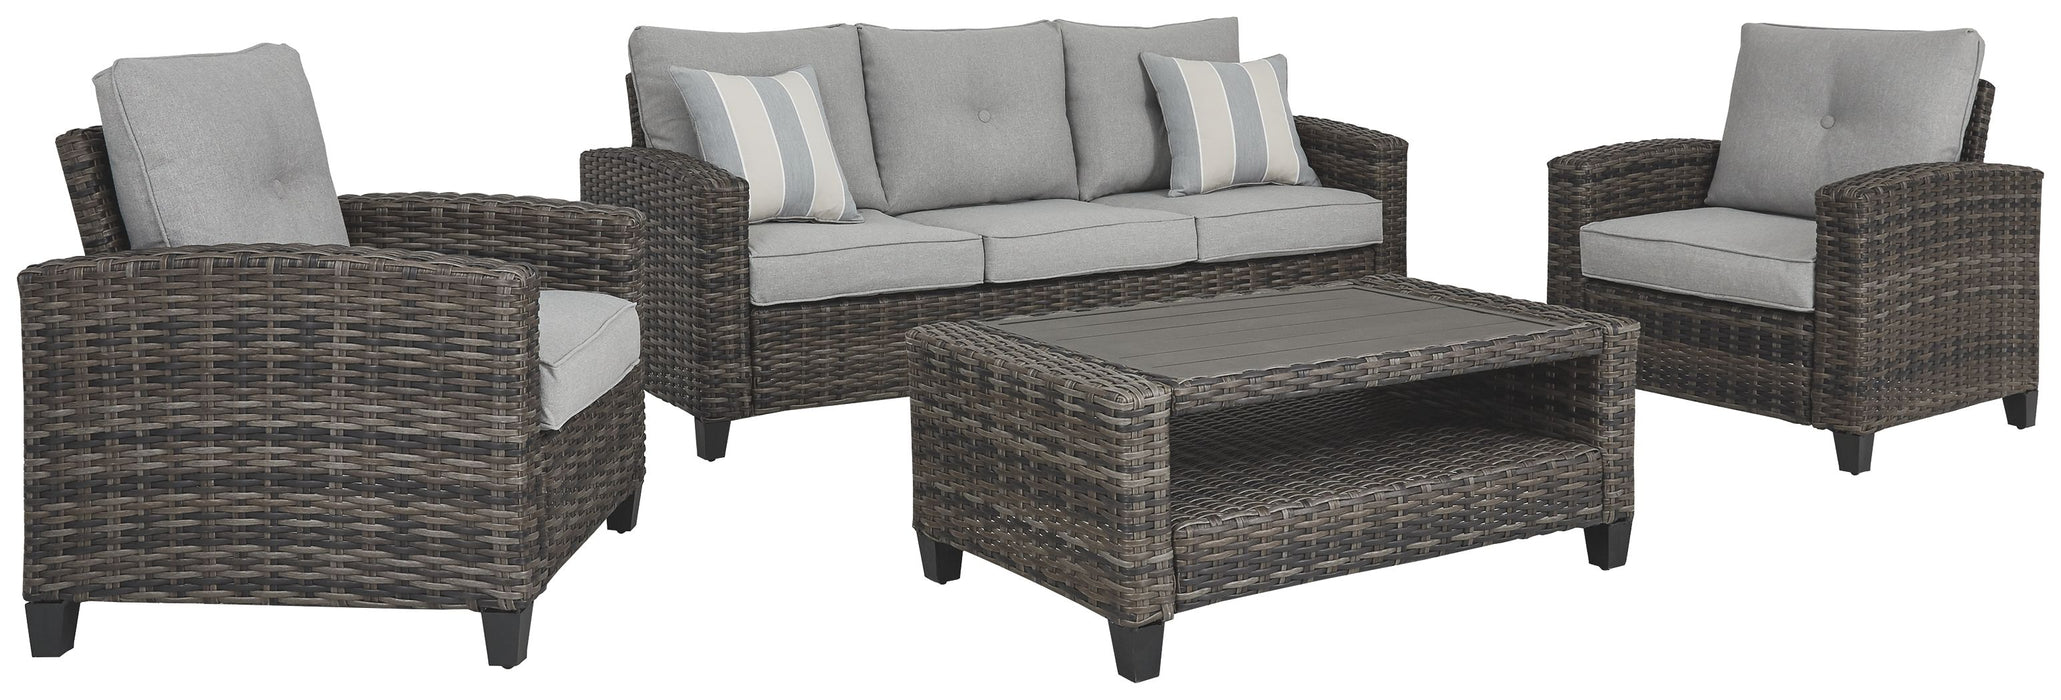 Cloverbrooke - Gray - Sofa, Chairs, Table Set (Set of 4) Capital Discount Furniture Home Furniture, Furniture Store